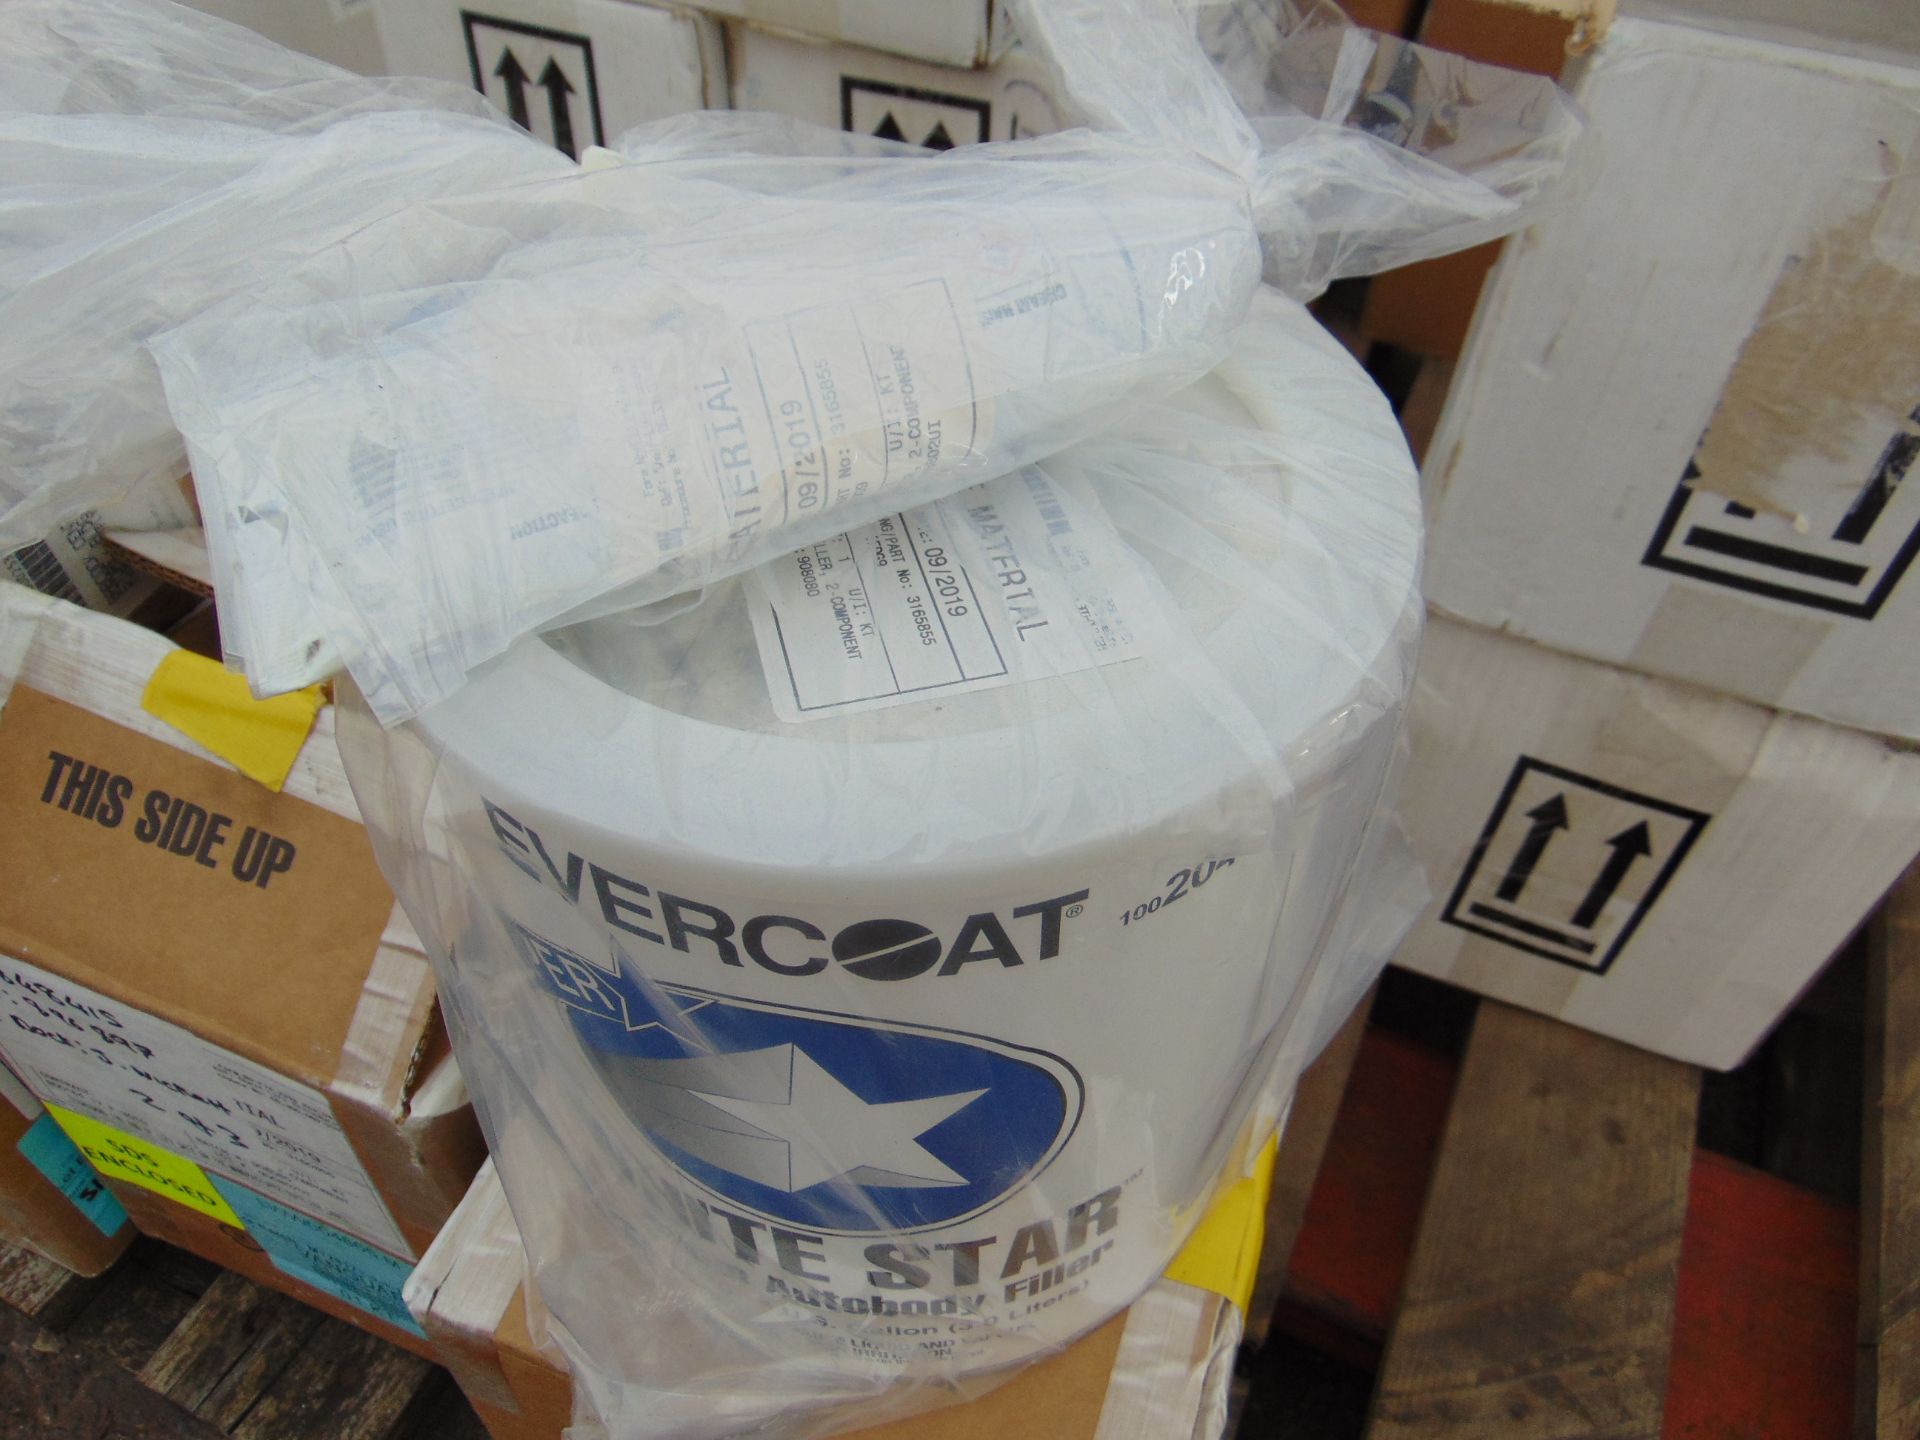 3x Unissued 3L Drums of Evercoat White Star Premium Autobody Filler Kits - Image 2 of 3